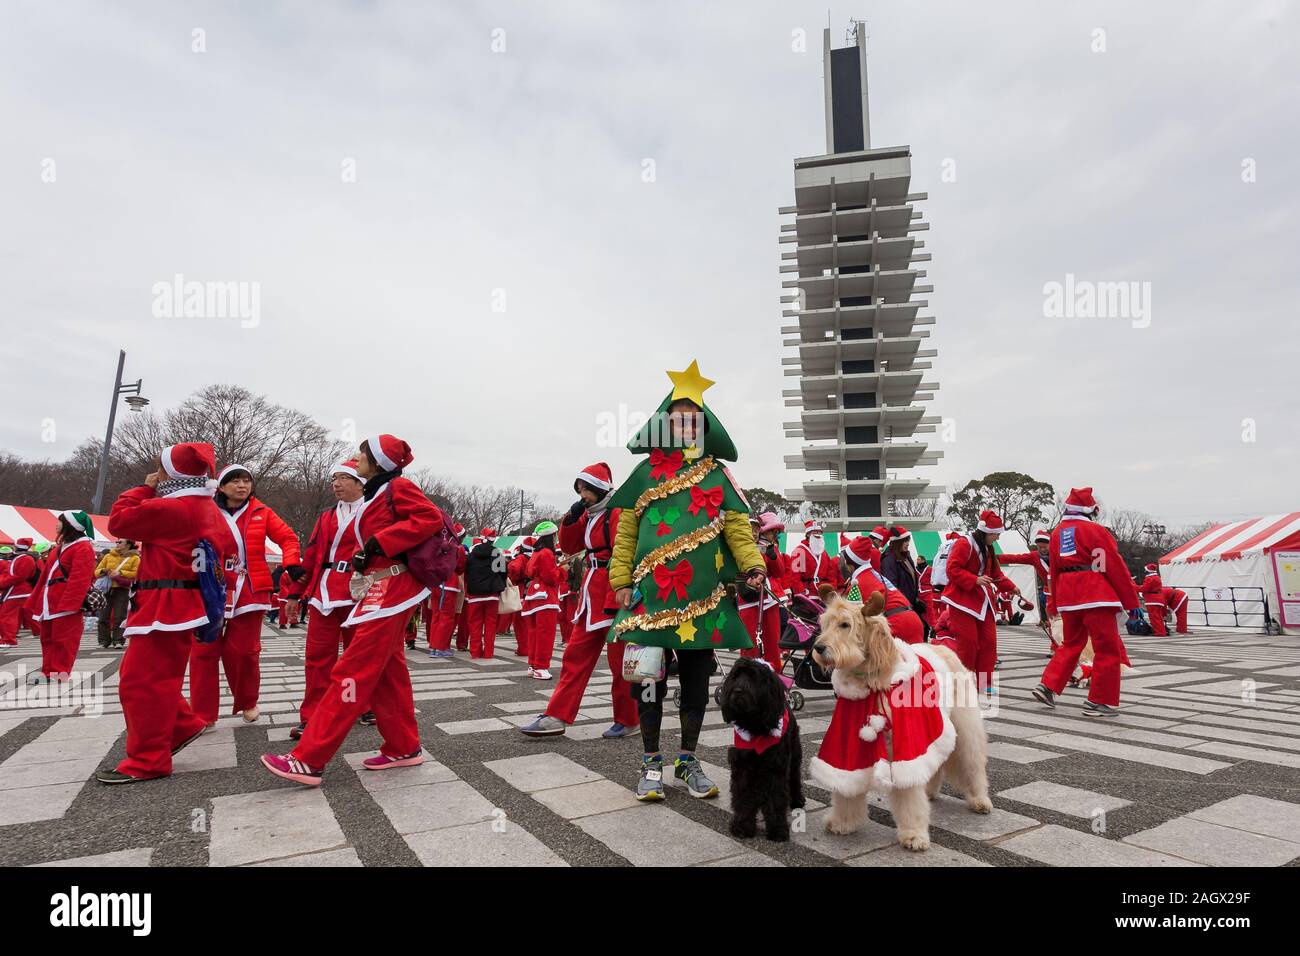 Participants with dogs take part in the Tokyo Great Santa Run in Komazawa-daigaku Olympic Park, Tokyo, Japan. Sunday December 22nd 2019, The great Santa Run was first run in Tokyo in 2018. This years run saw over 3,000 people in Santa costumes run and walk a 4.3 kilometre course to raise money for medical charities in japan and water projects for the Maasai in Kenya. Stock Photo